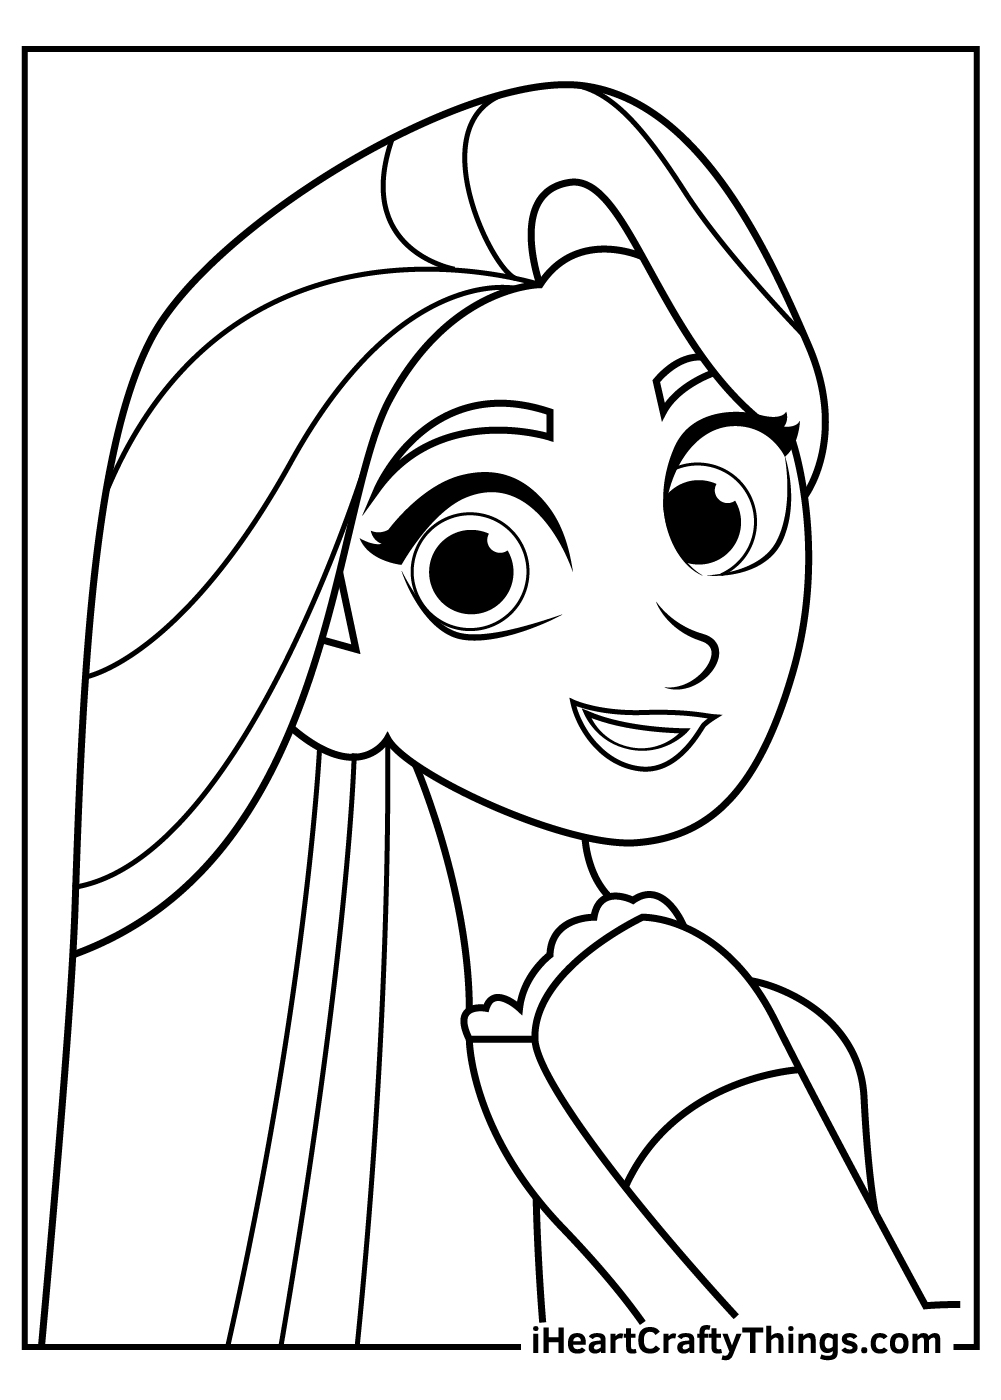 Rapunzel Coloring Pages Updated 20